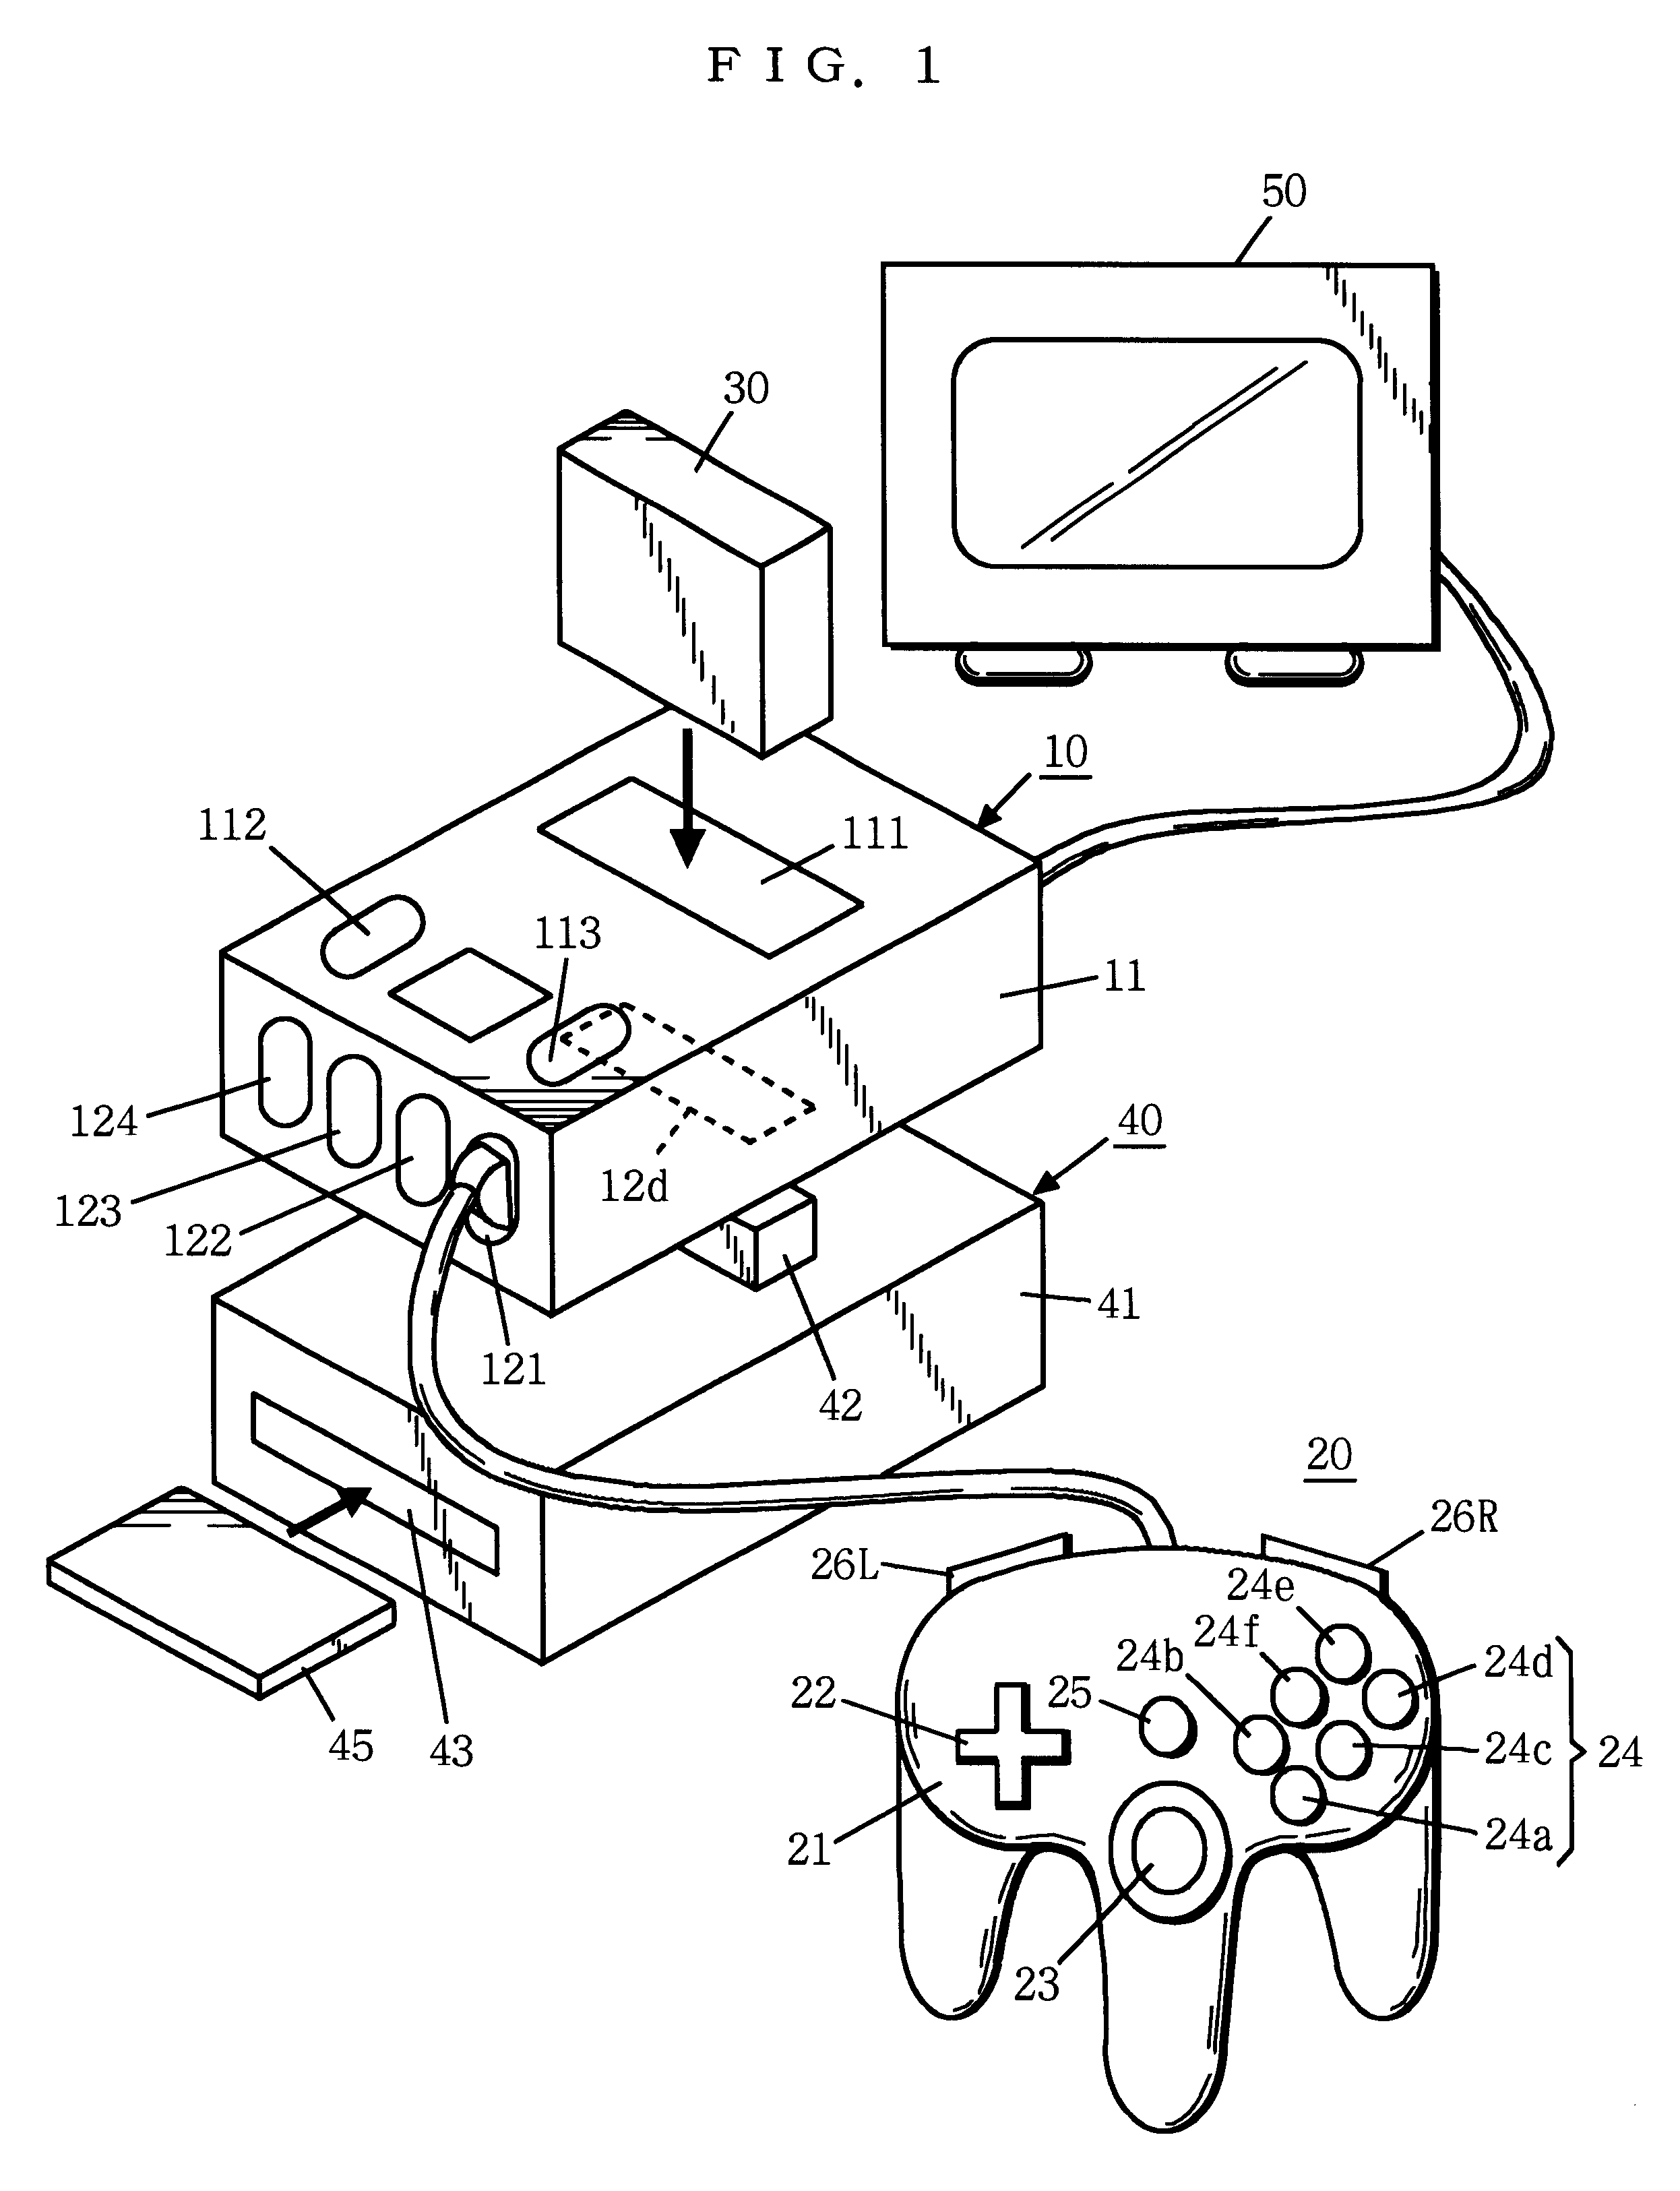 Device for capturing video image data and combining with original image data